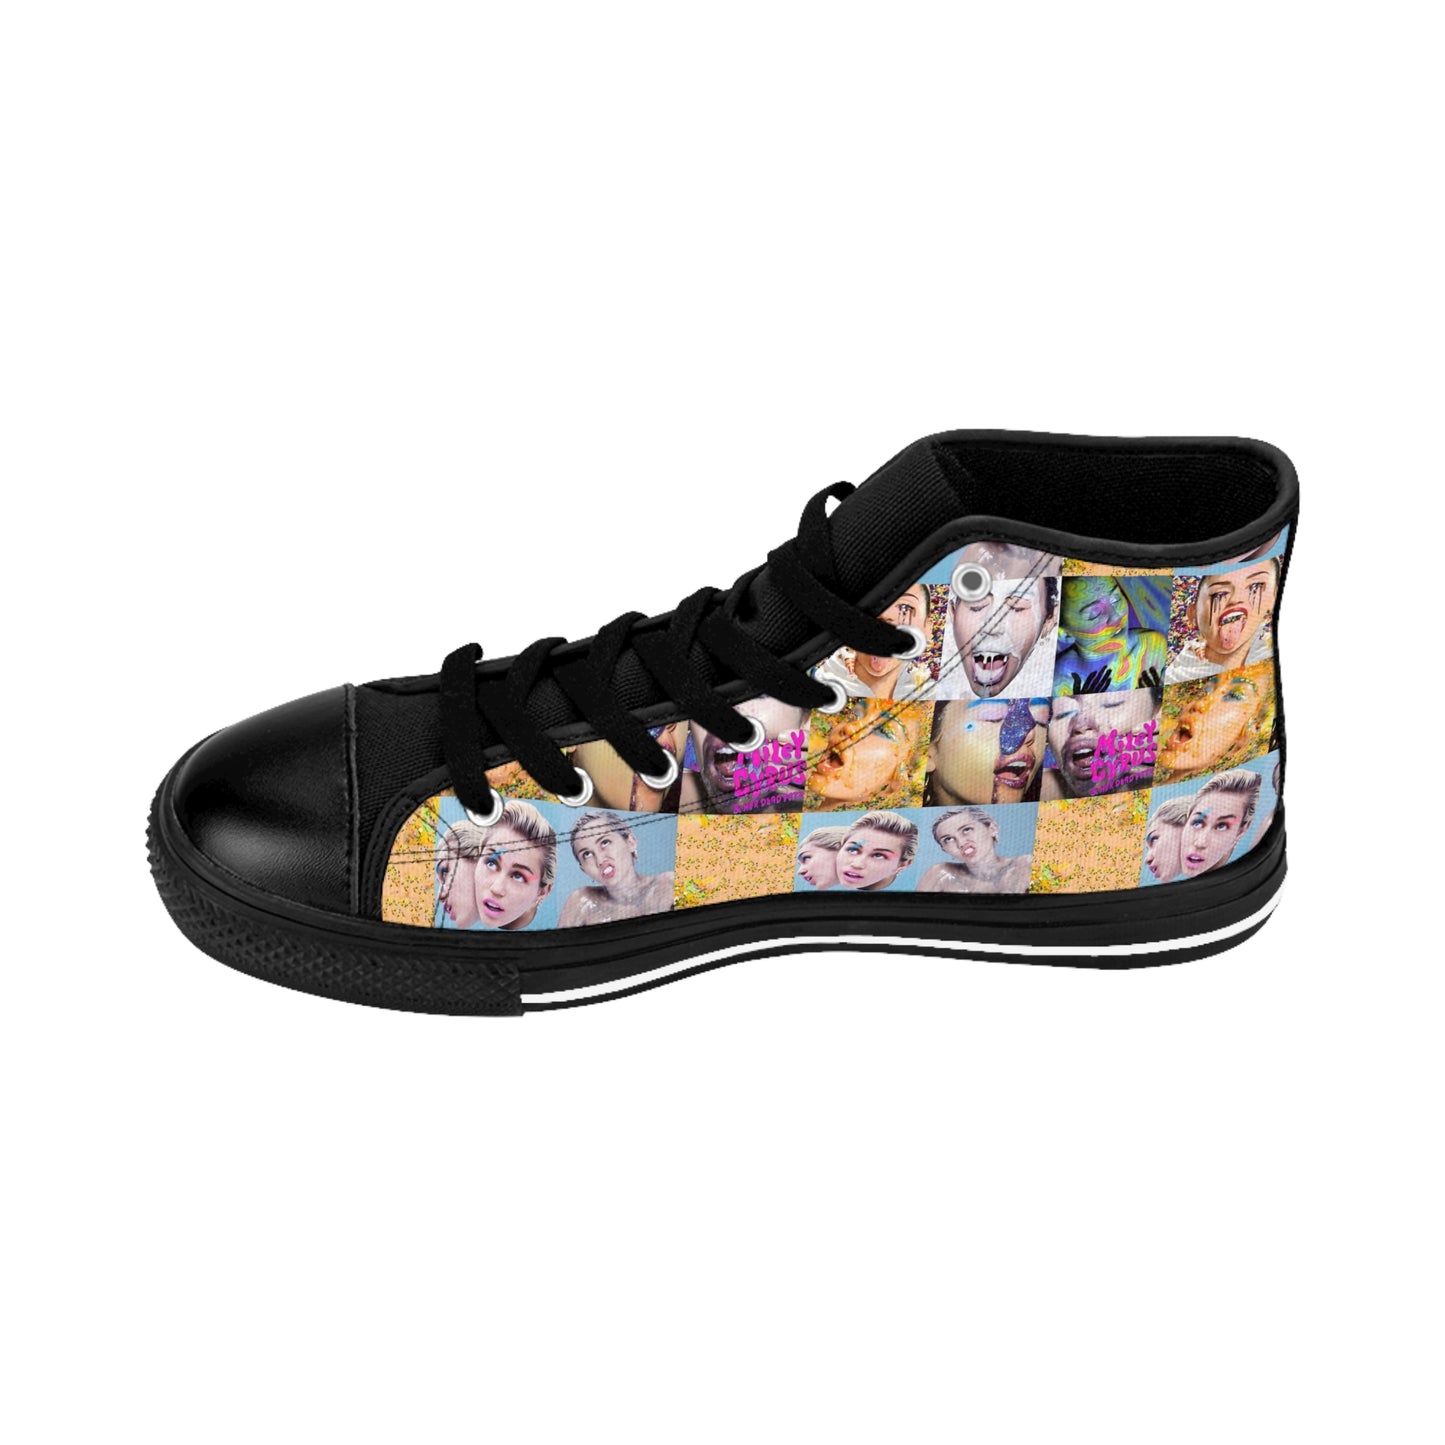 Miley Cyrus & Her Dead Petz Mosaic Women's Classic Sneakers